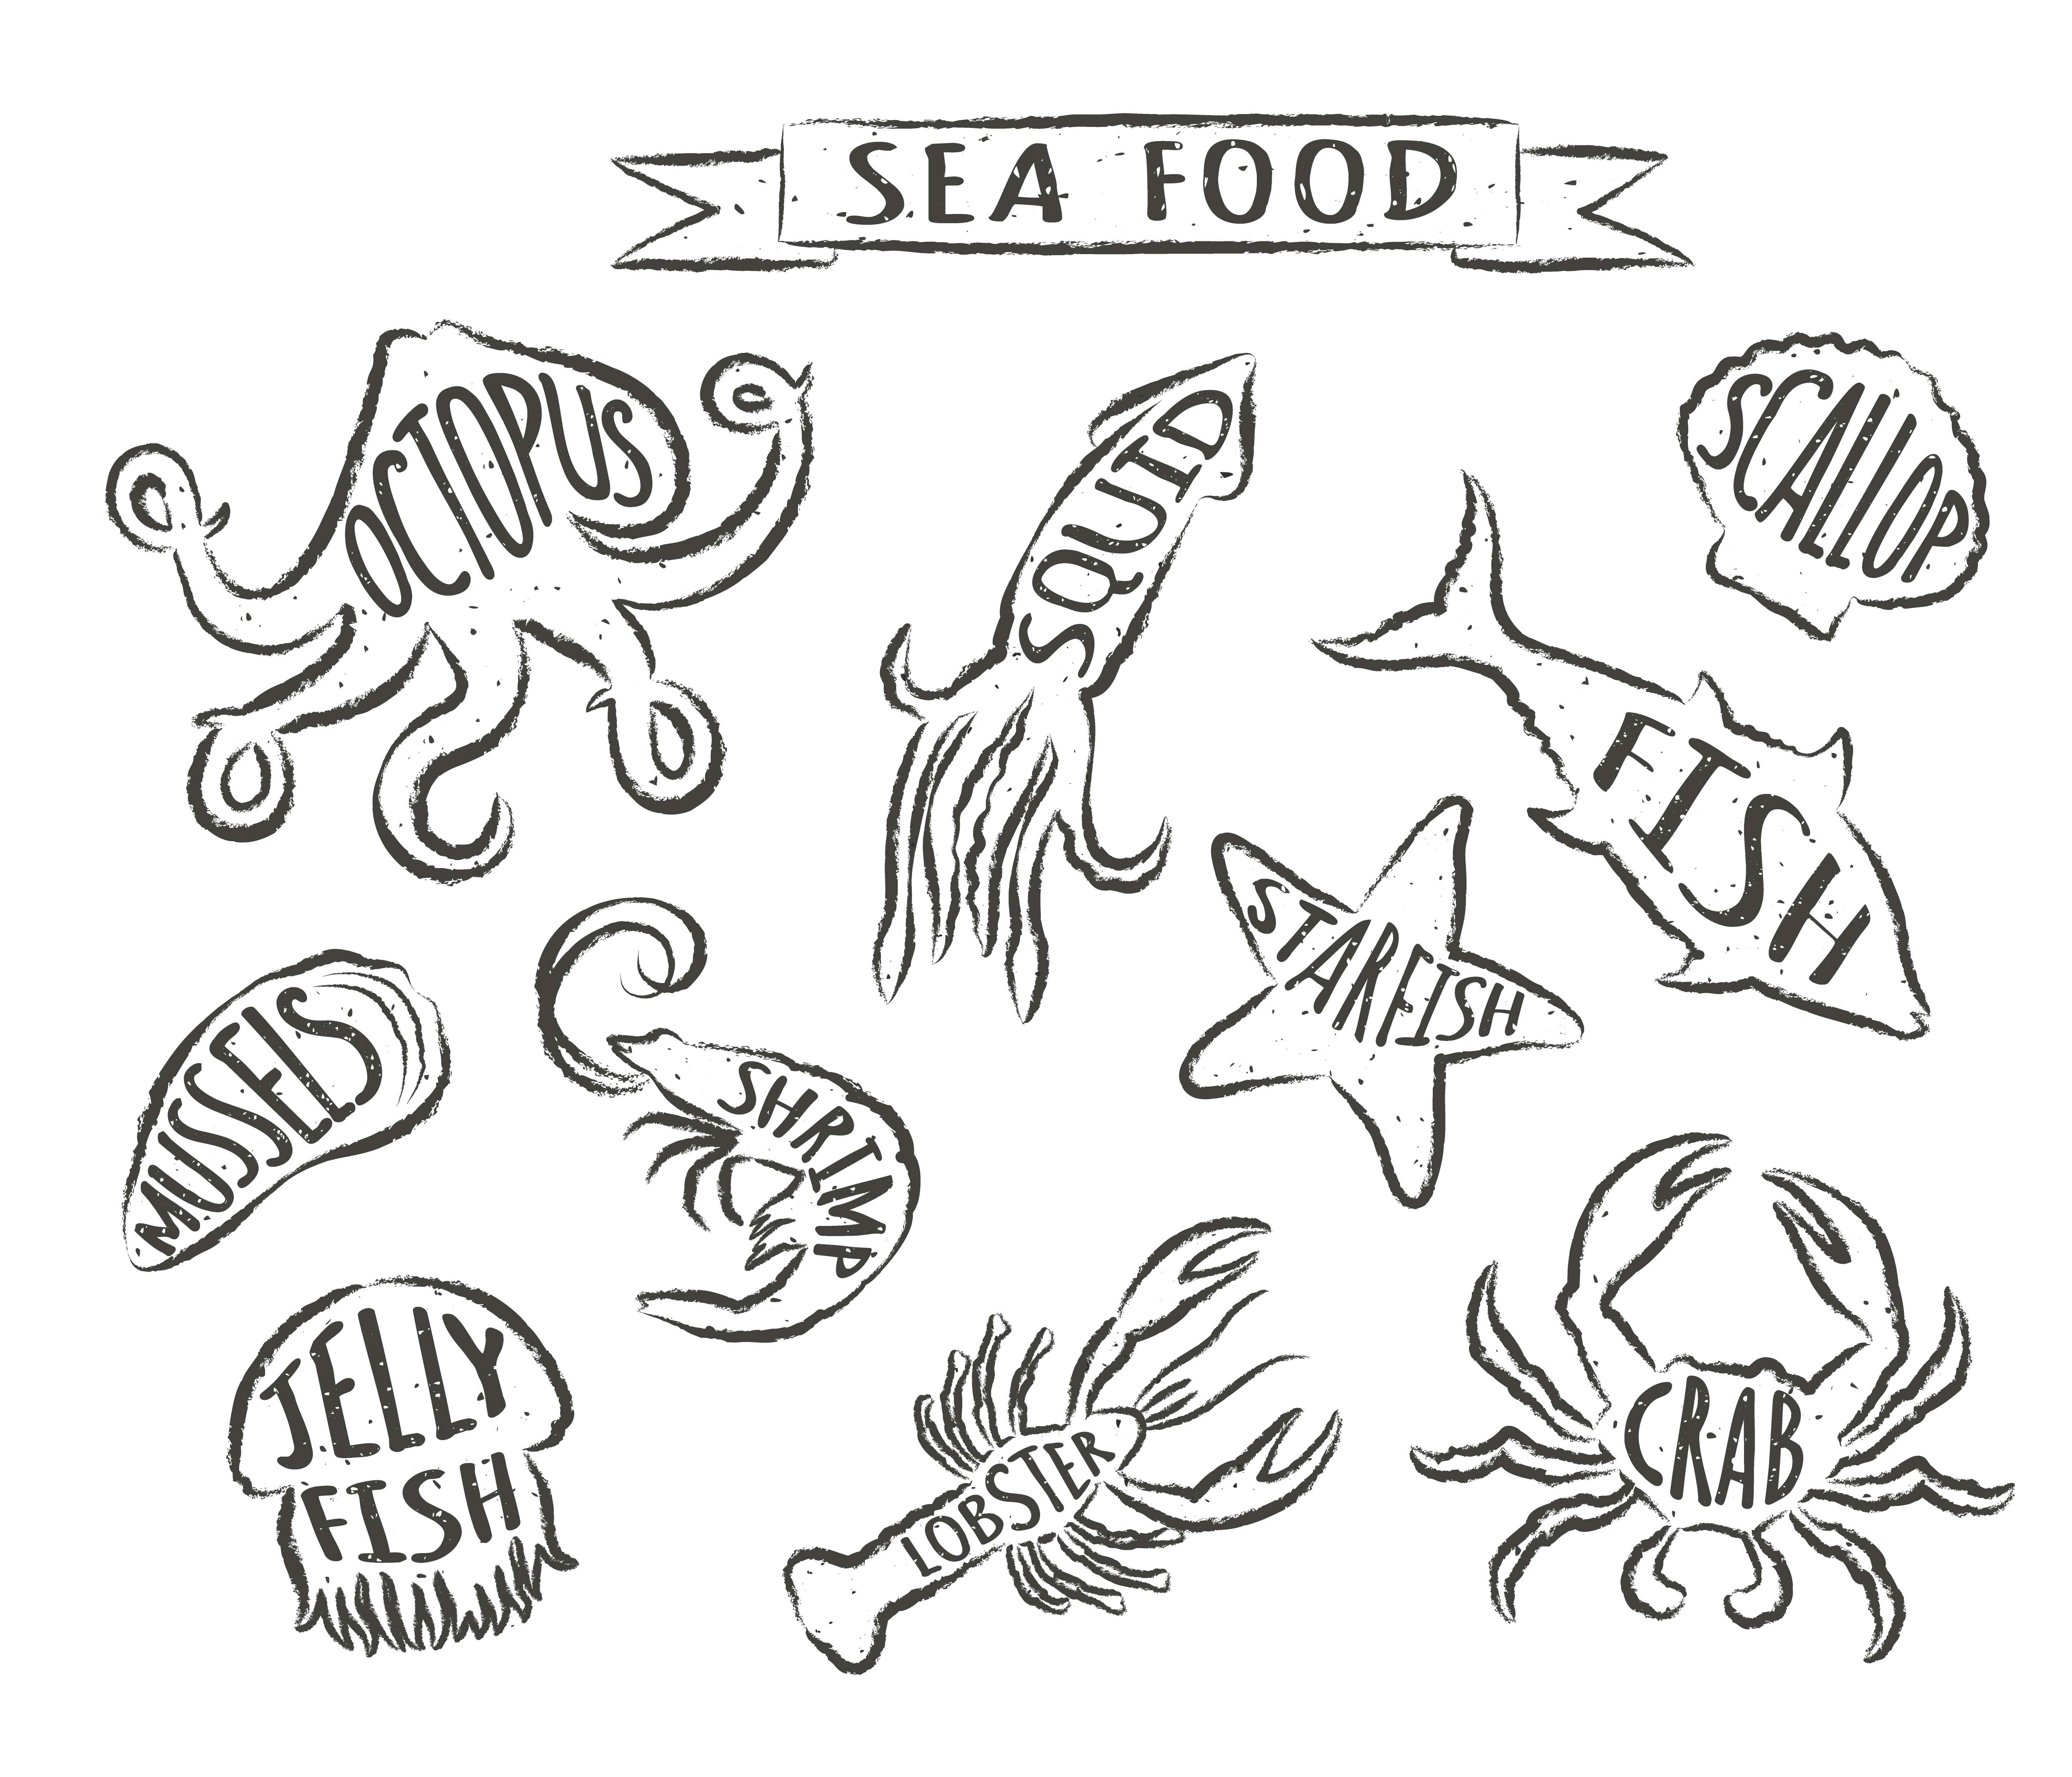 Seafood hand drawn vector illustrations isolated on white background,  elements for restaurant menu design, decor, label. Grunge contours of sea  animals with names. 616560 Vector Art at Vecteezy